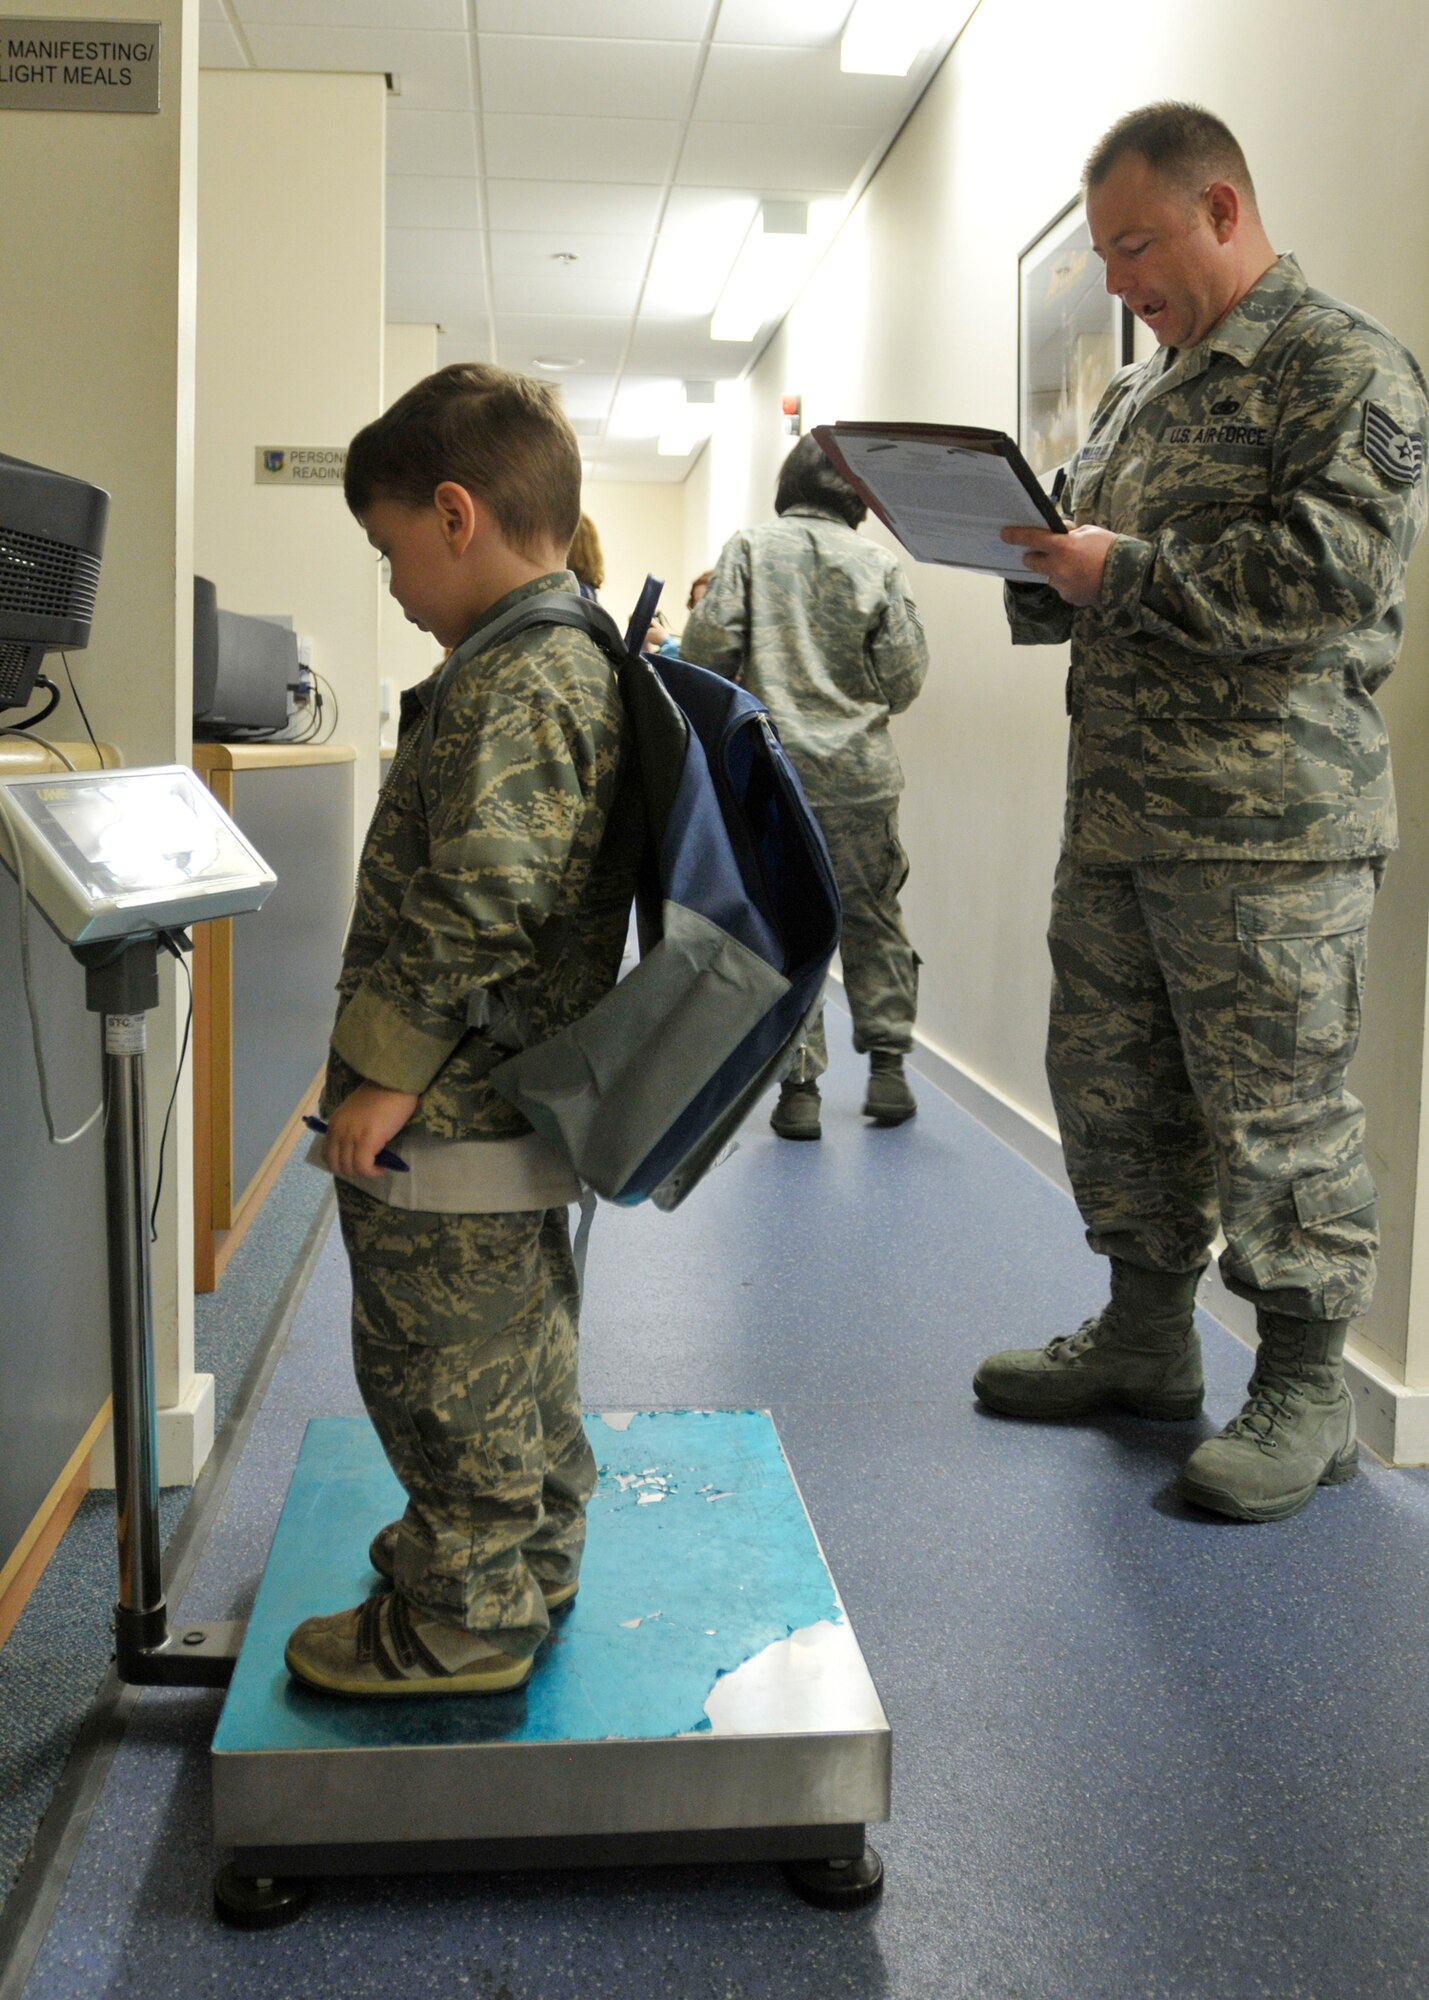 ROYAL AIR FORCE LAKENHEATH, England - Tech. Sgt. Jeremy Aumiller, 48th Force Support Squadron Readiness NCO (right),  annotates the weight of 3-year-old Brent Leaver on his deployment checklist as he processes through the line at the Installation Deployment Readiness Center for a simulated deployment line, Aug. 25, 2011. The mock deployment line is designed to provide children with a better understanding of what their parents experience as they prepare for deployment. (U.S. Air Force photo/Senior Airman Tiffany M. Deuel)